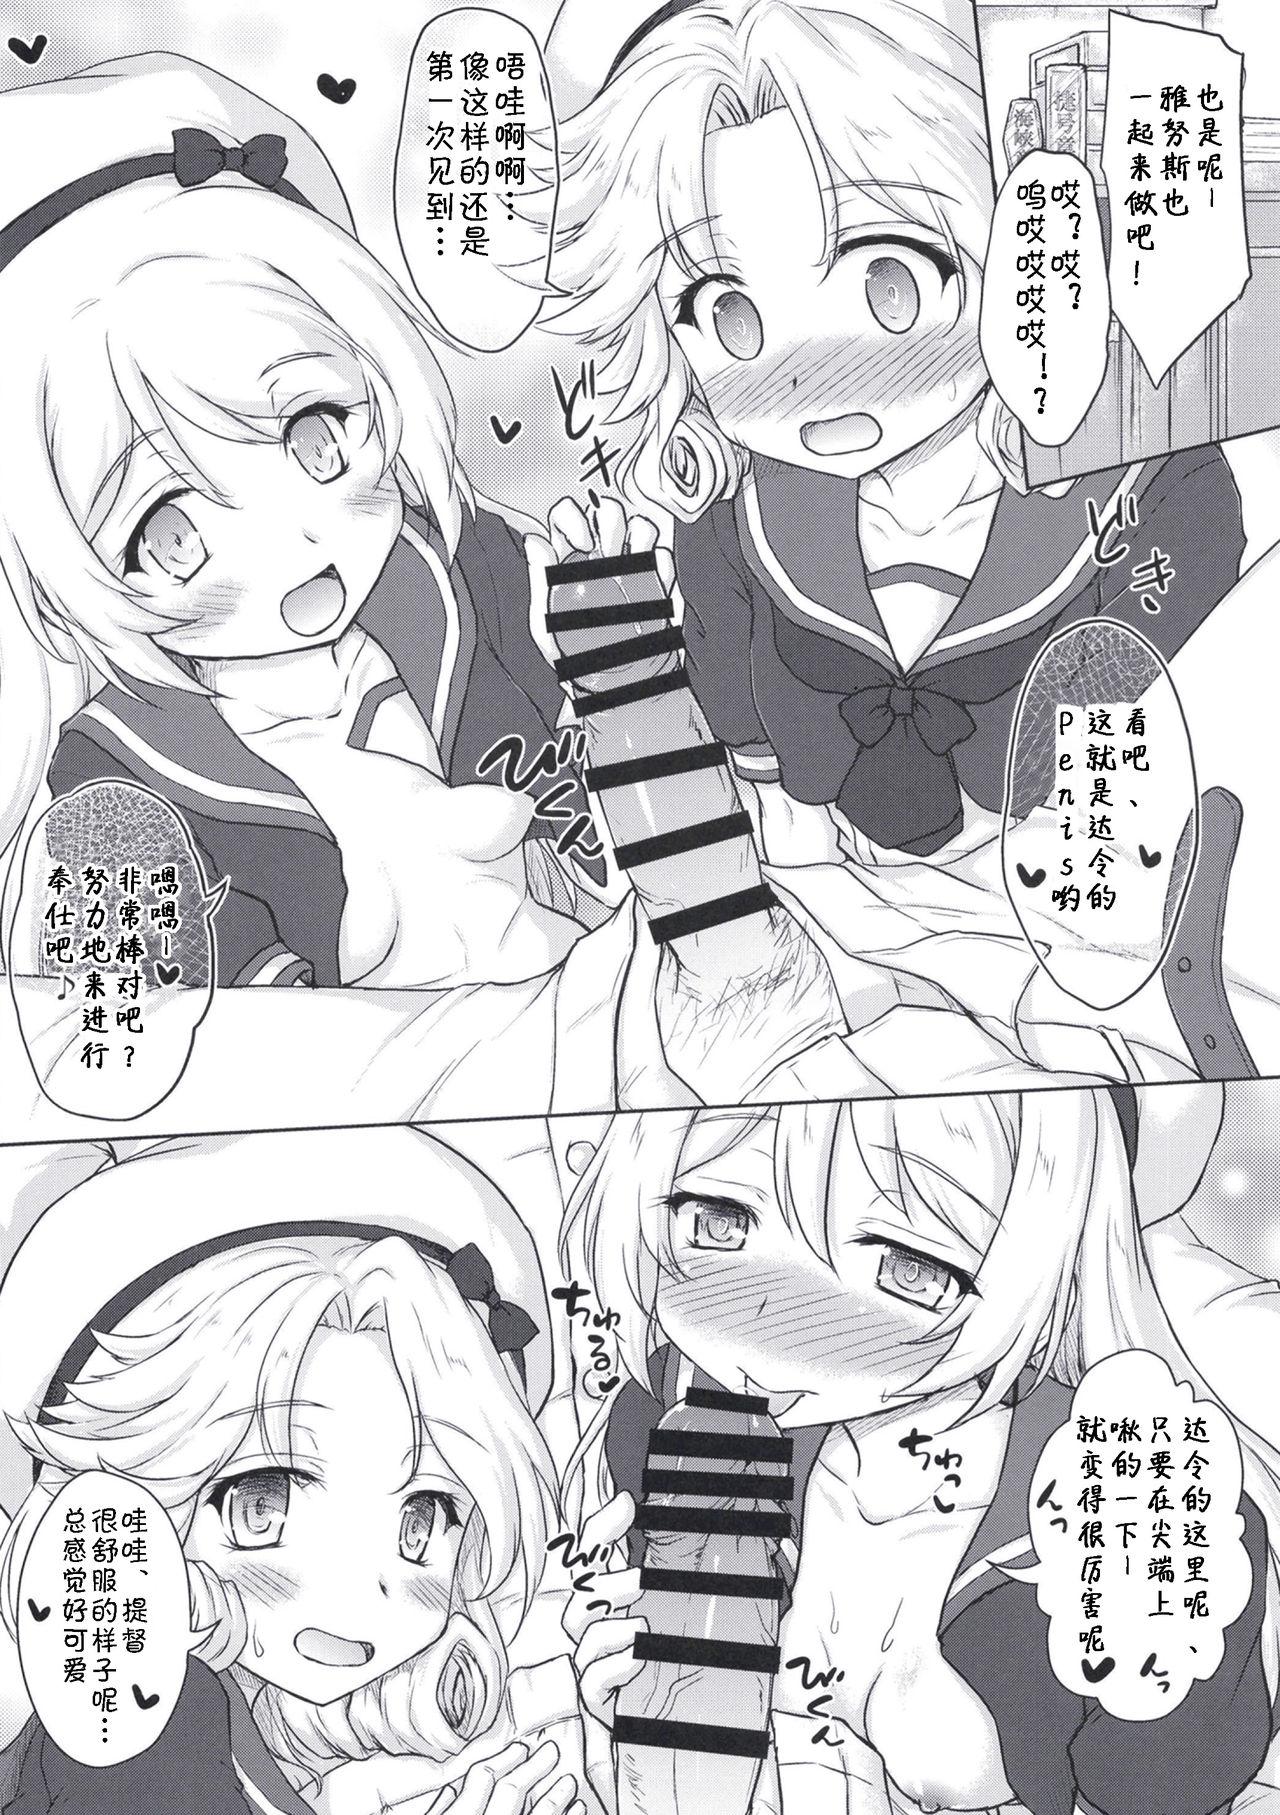 Banging Darling is in sight! act2 - Kantai collection Rabo - Page 9